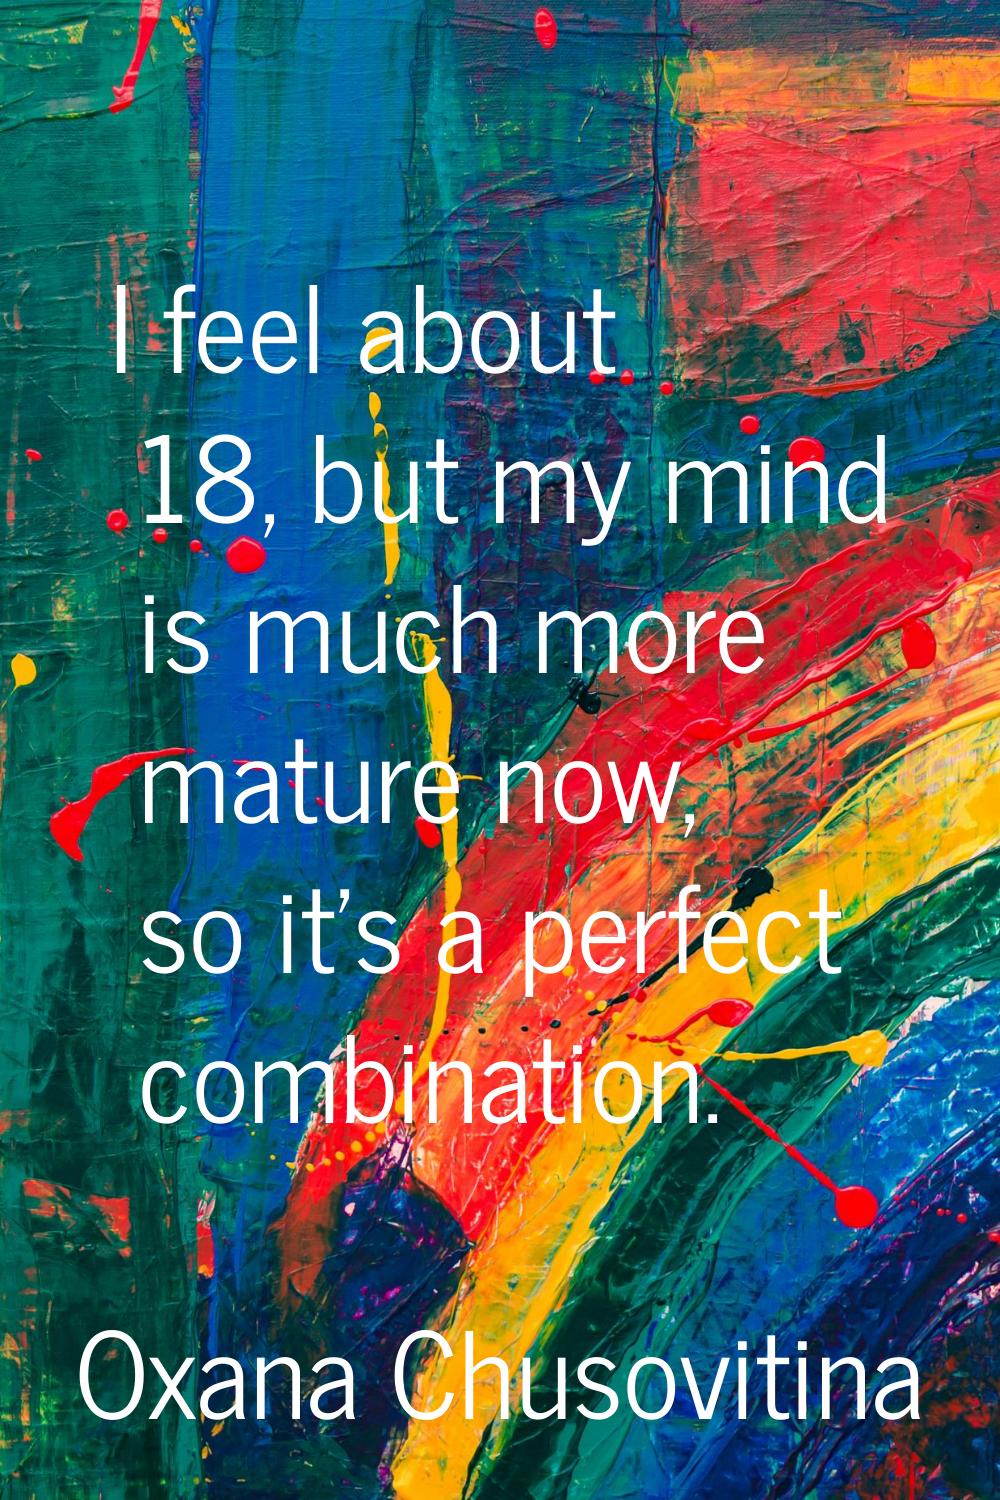 I feel about 18, but my mind is much more mature now, so it's a perfect combination.